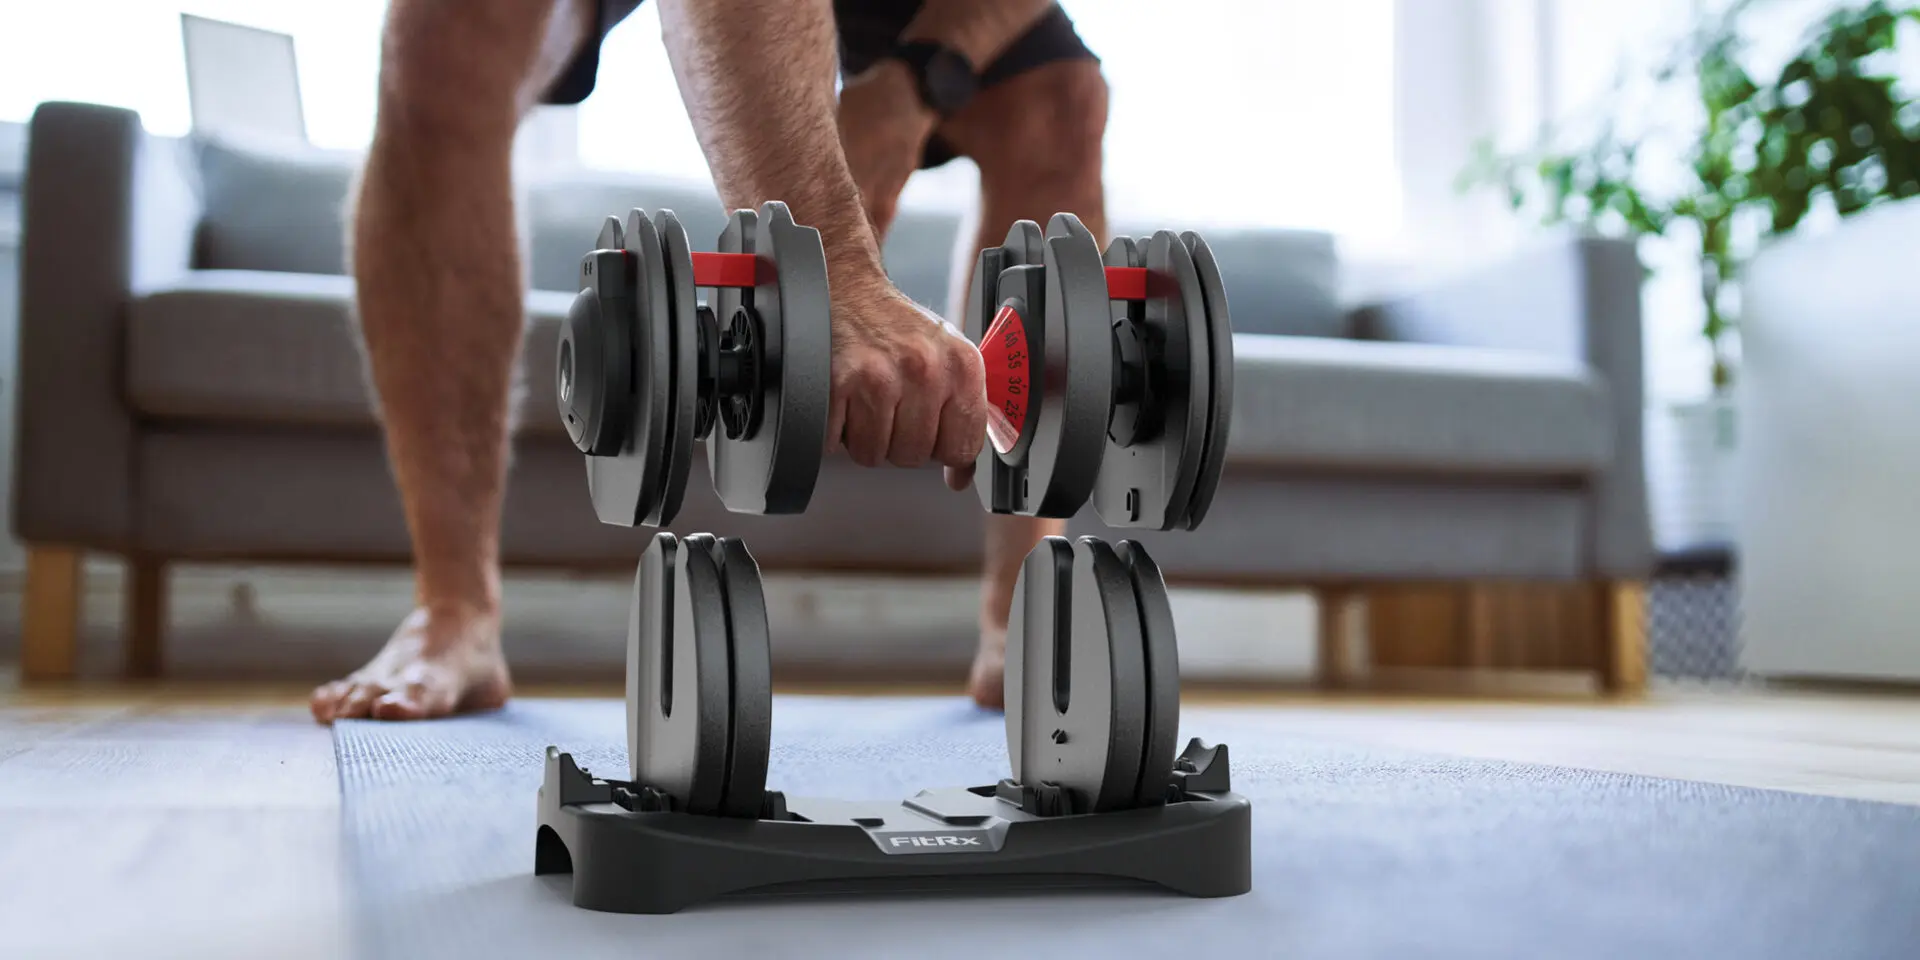 All you’ll need is some time and space in your living room to sneak in a solid workout with the SmartBell, a convenient at-home fitness solution.